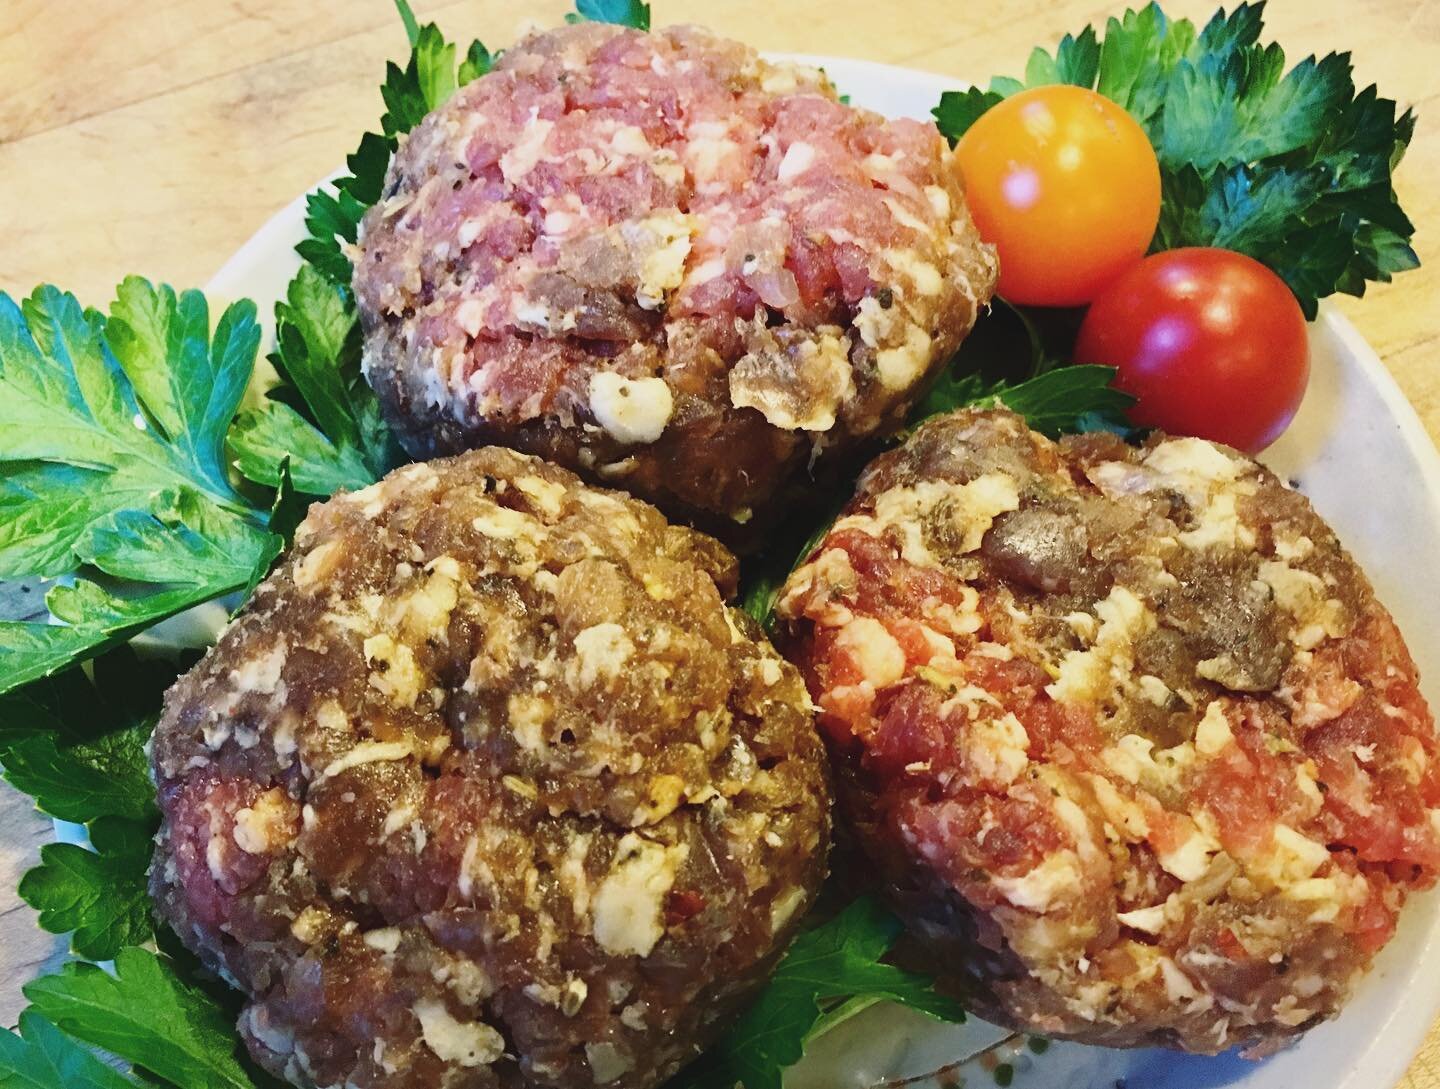 @wildplumfarm pork sausage now available for pre-order! 25LB shares of plain ground pork come in 1LB packages &amp; are ready for your own spices/herbs to be added or delicious on their own with simple salt &amp; pepper. 

Order now for late December